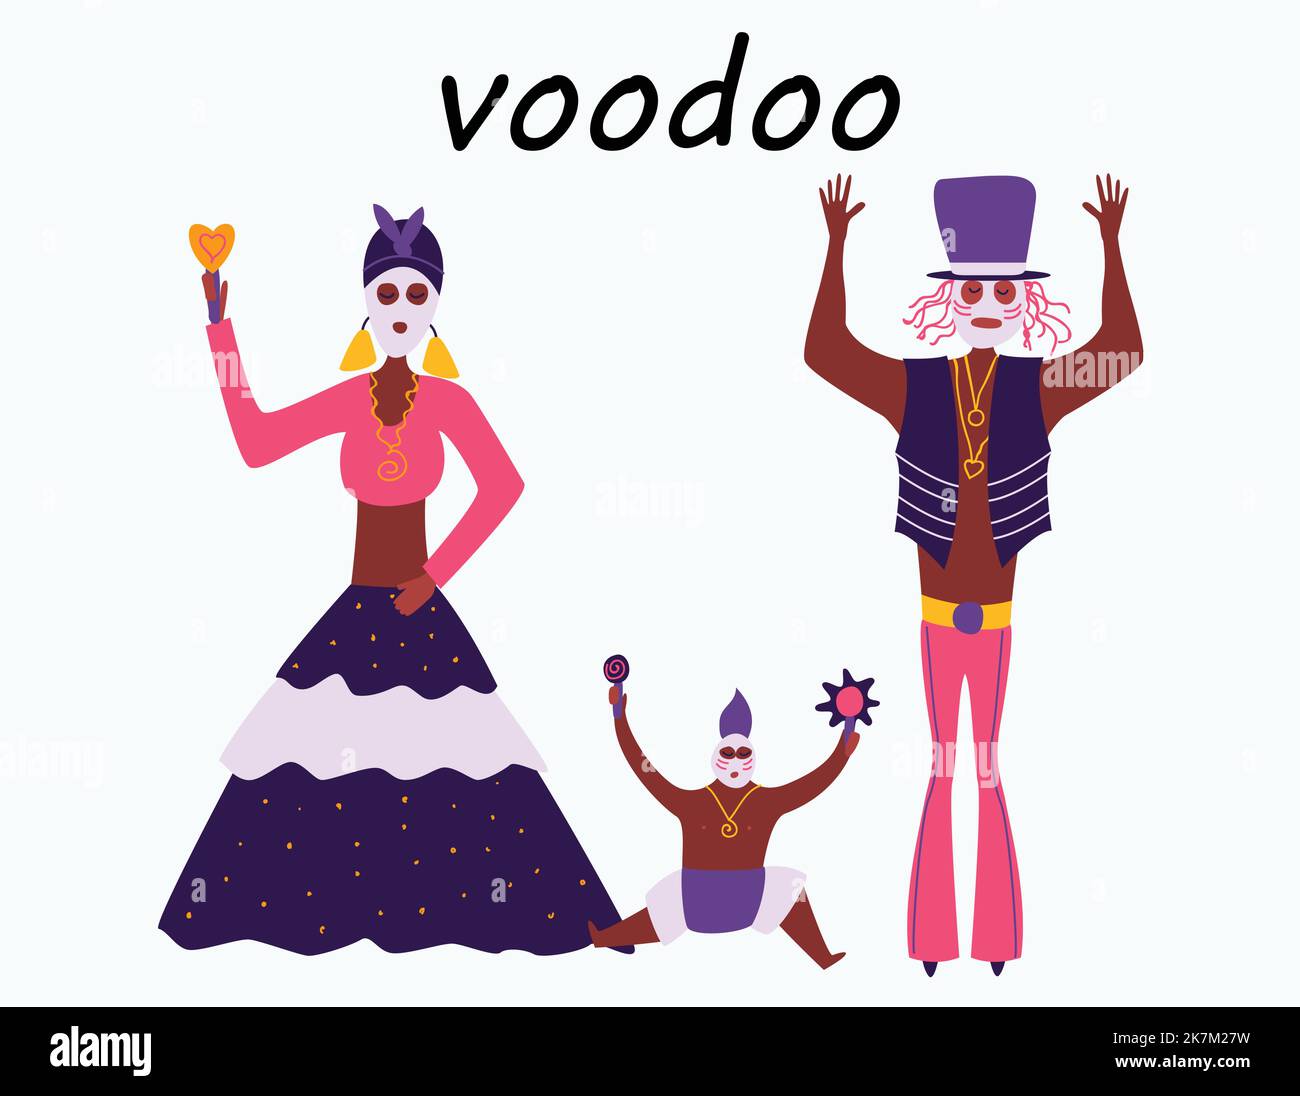 voodoo outfit, traditional family, character illustration on white isolated background Stock Vector